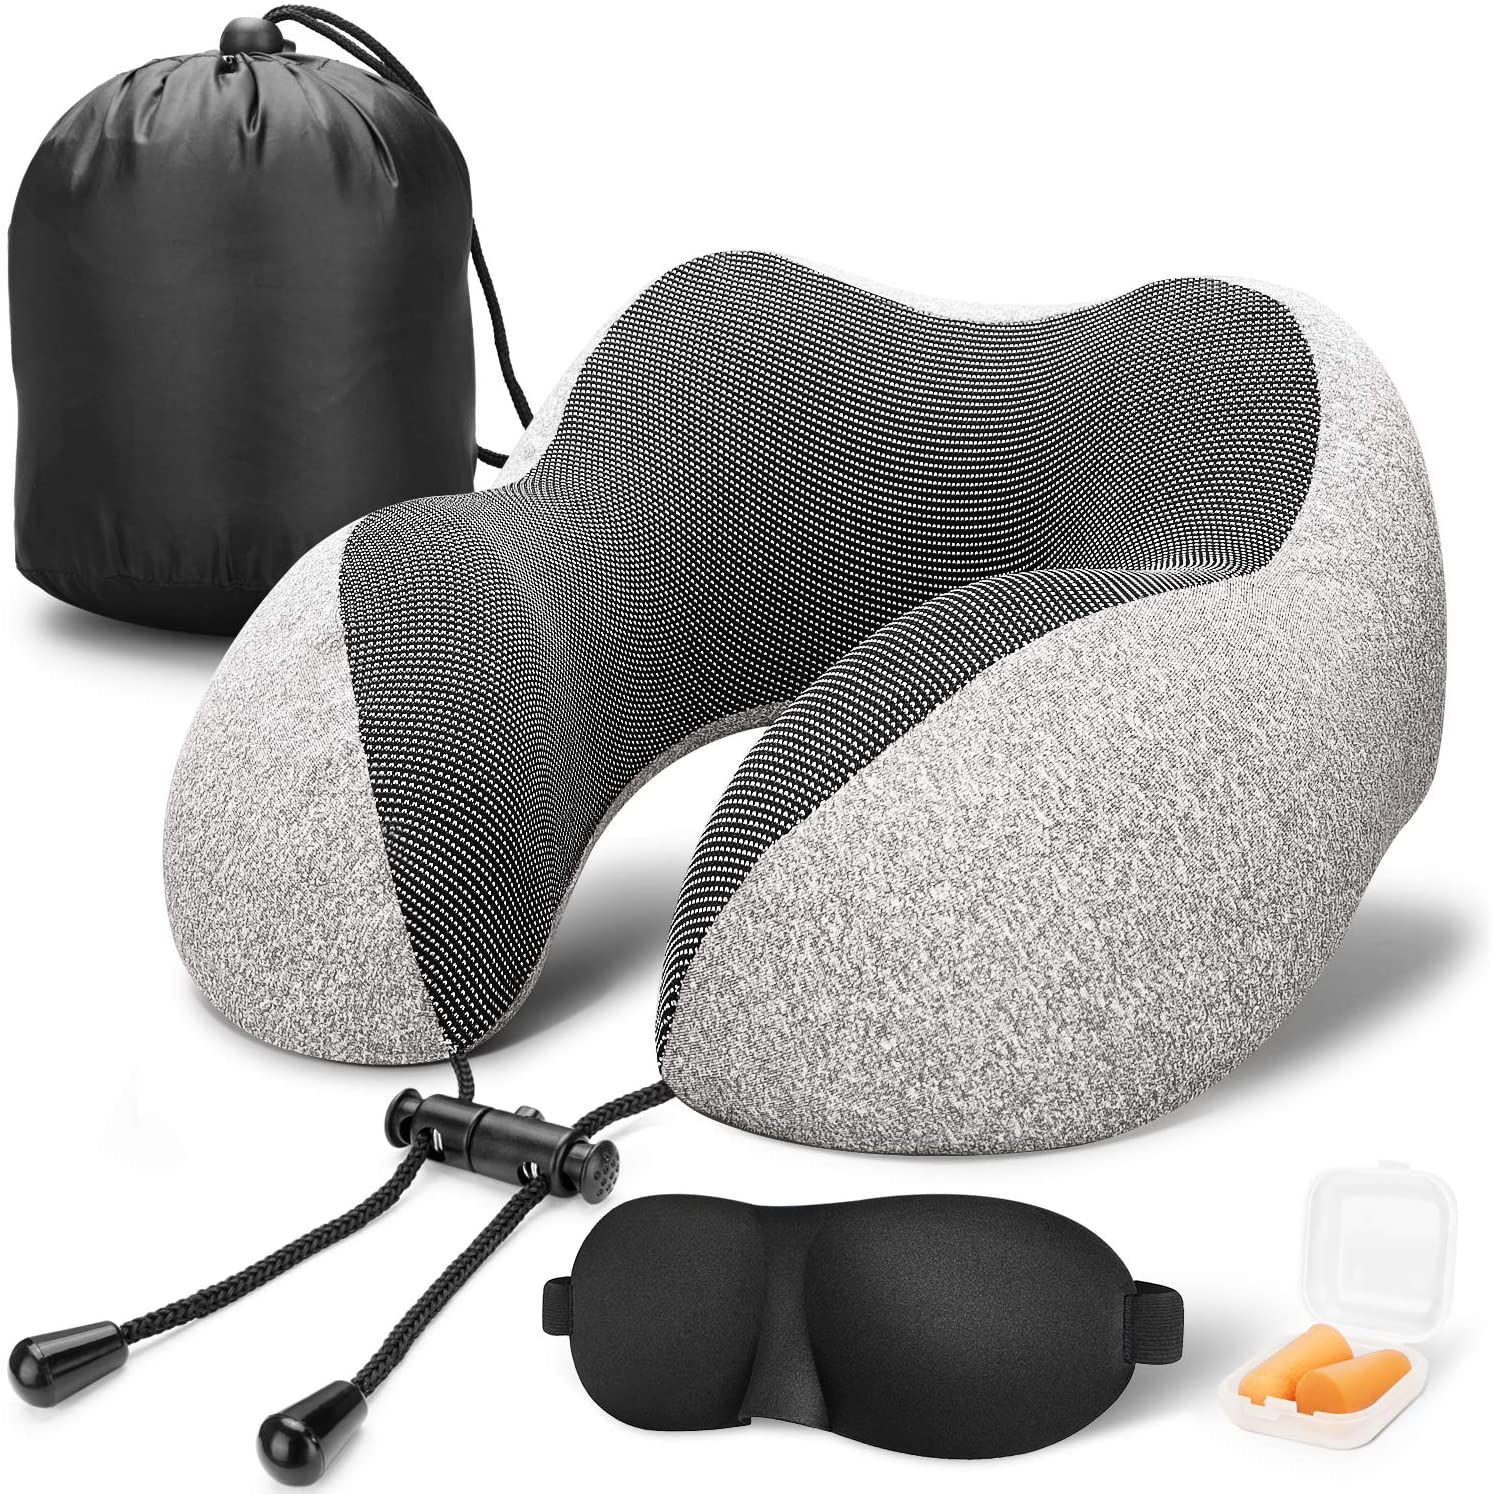 SUGIFT Travel Pillow 100% Pure Memory Foam Neck Pillow, Comfortable & Breathable Cover, Machine Washable, Airplane Travel Kit with 3D Contoured Eye Masks, Earplugs, and Luxury Bag, Standard (Grey)